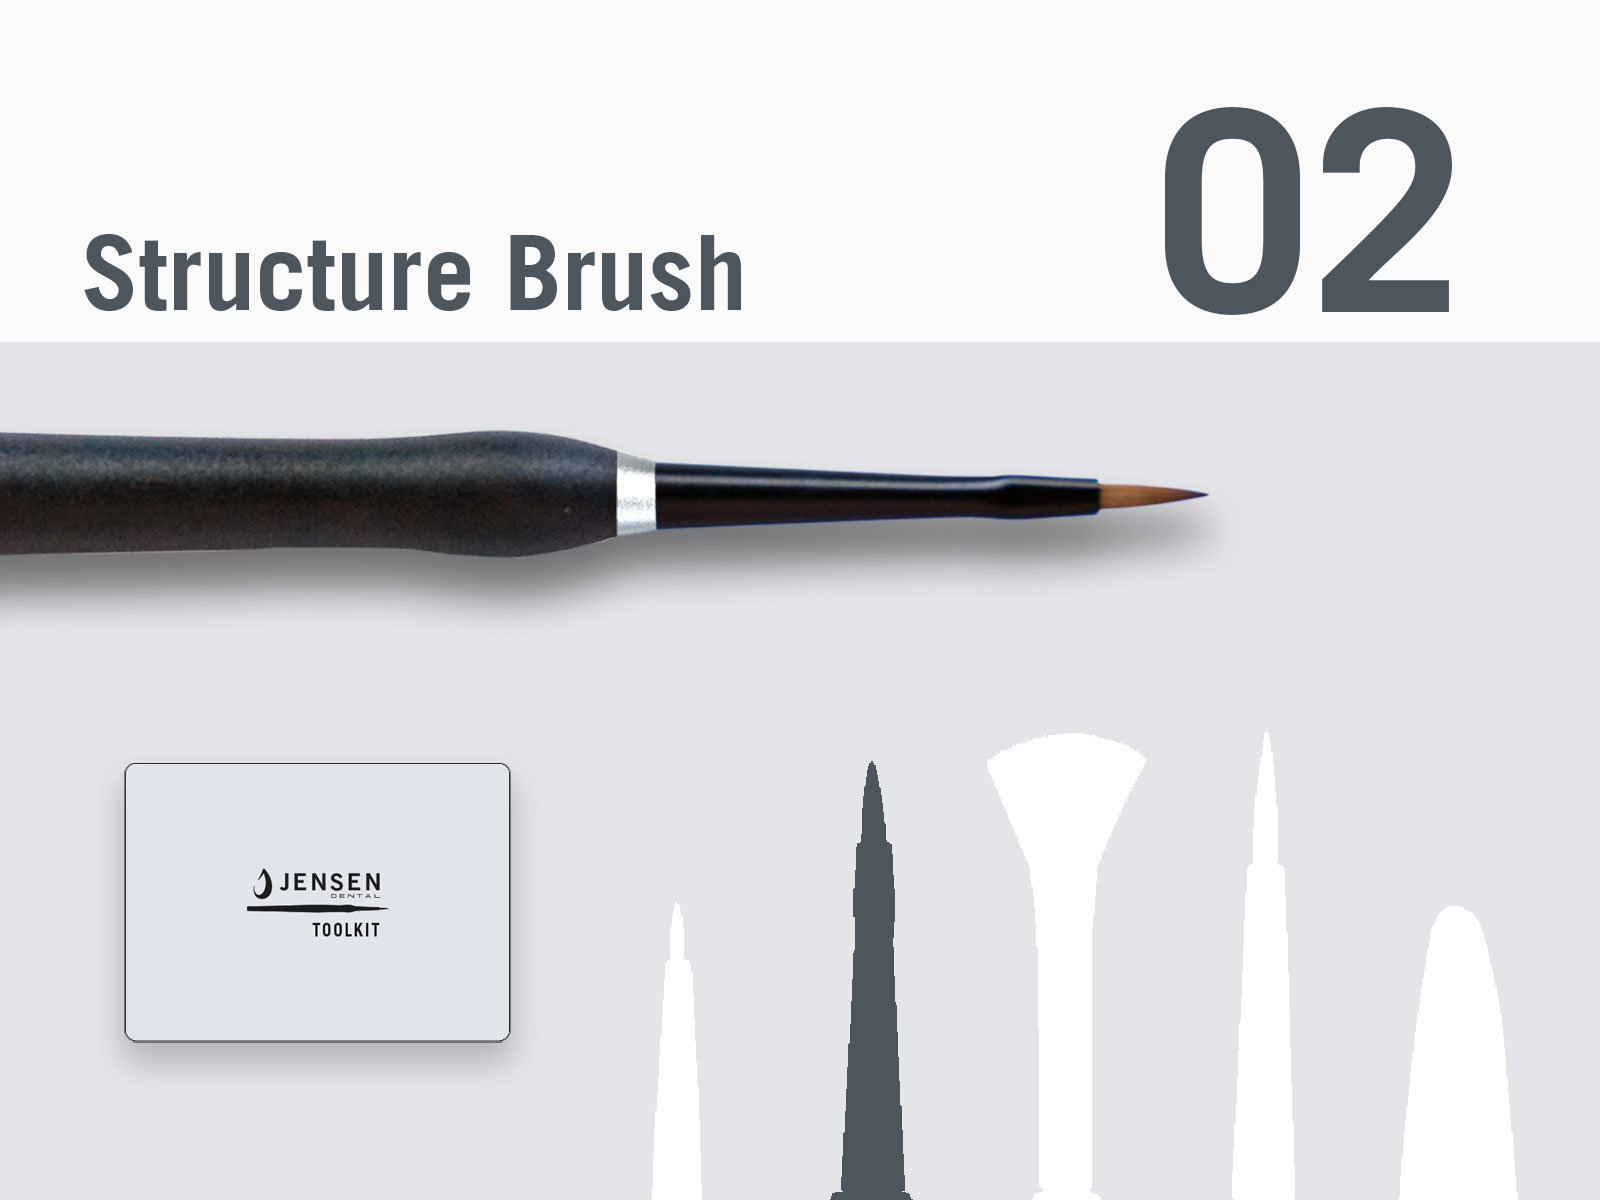 Structure brush with replaceable brush tip